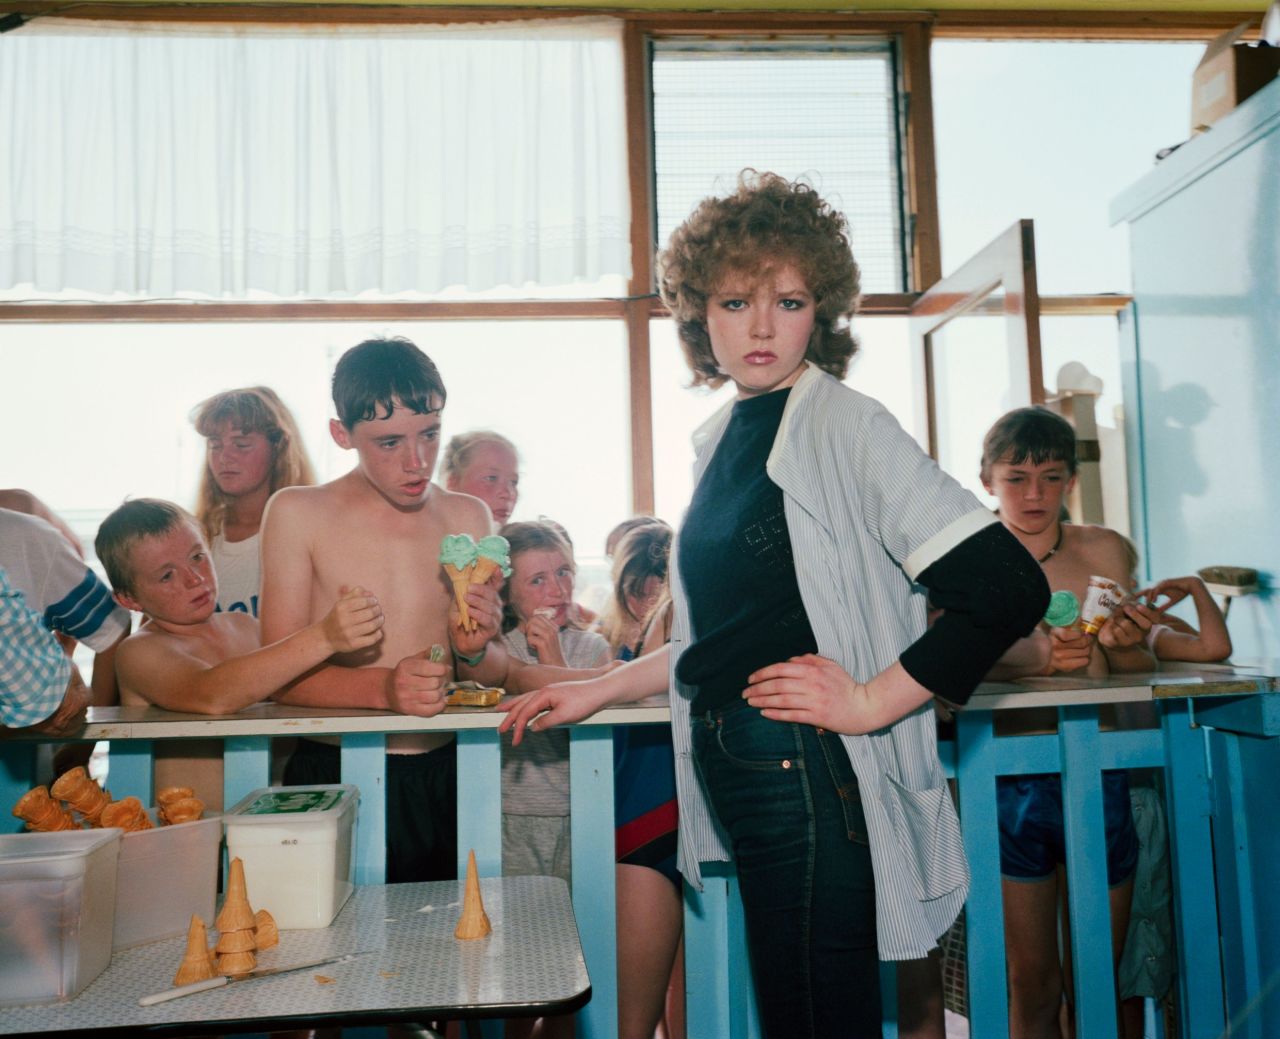 Martin Parr is best known internationally for humorously capturing the quirks of British life